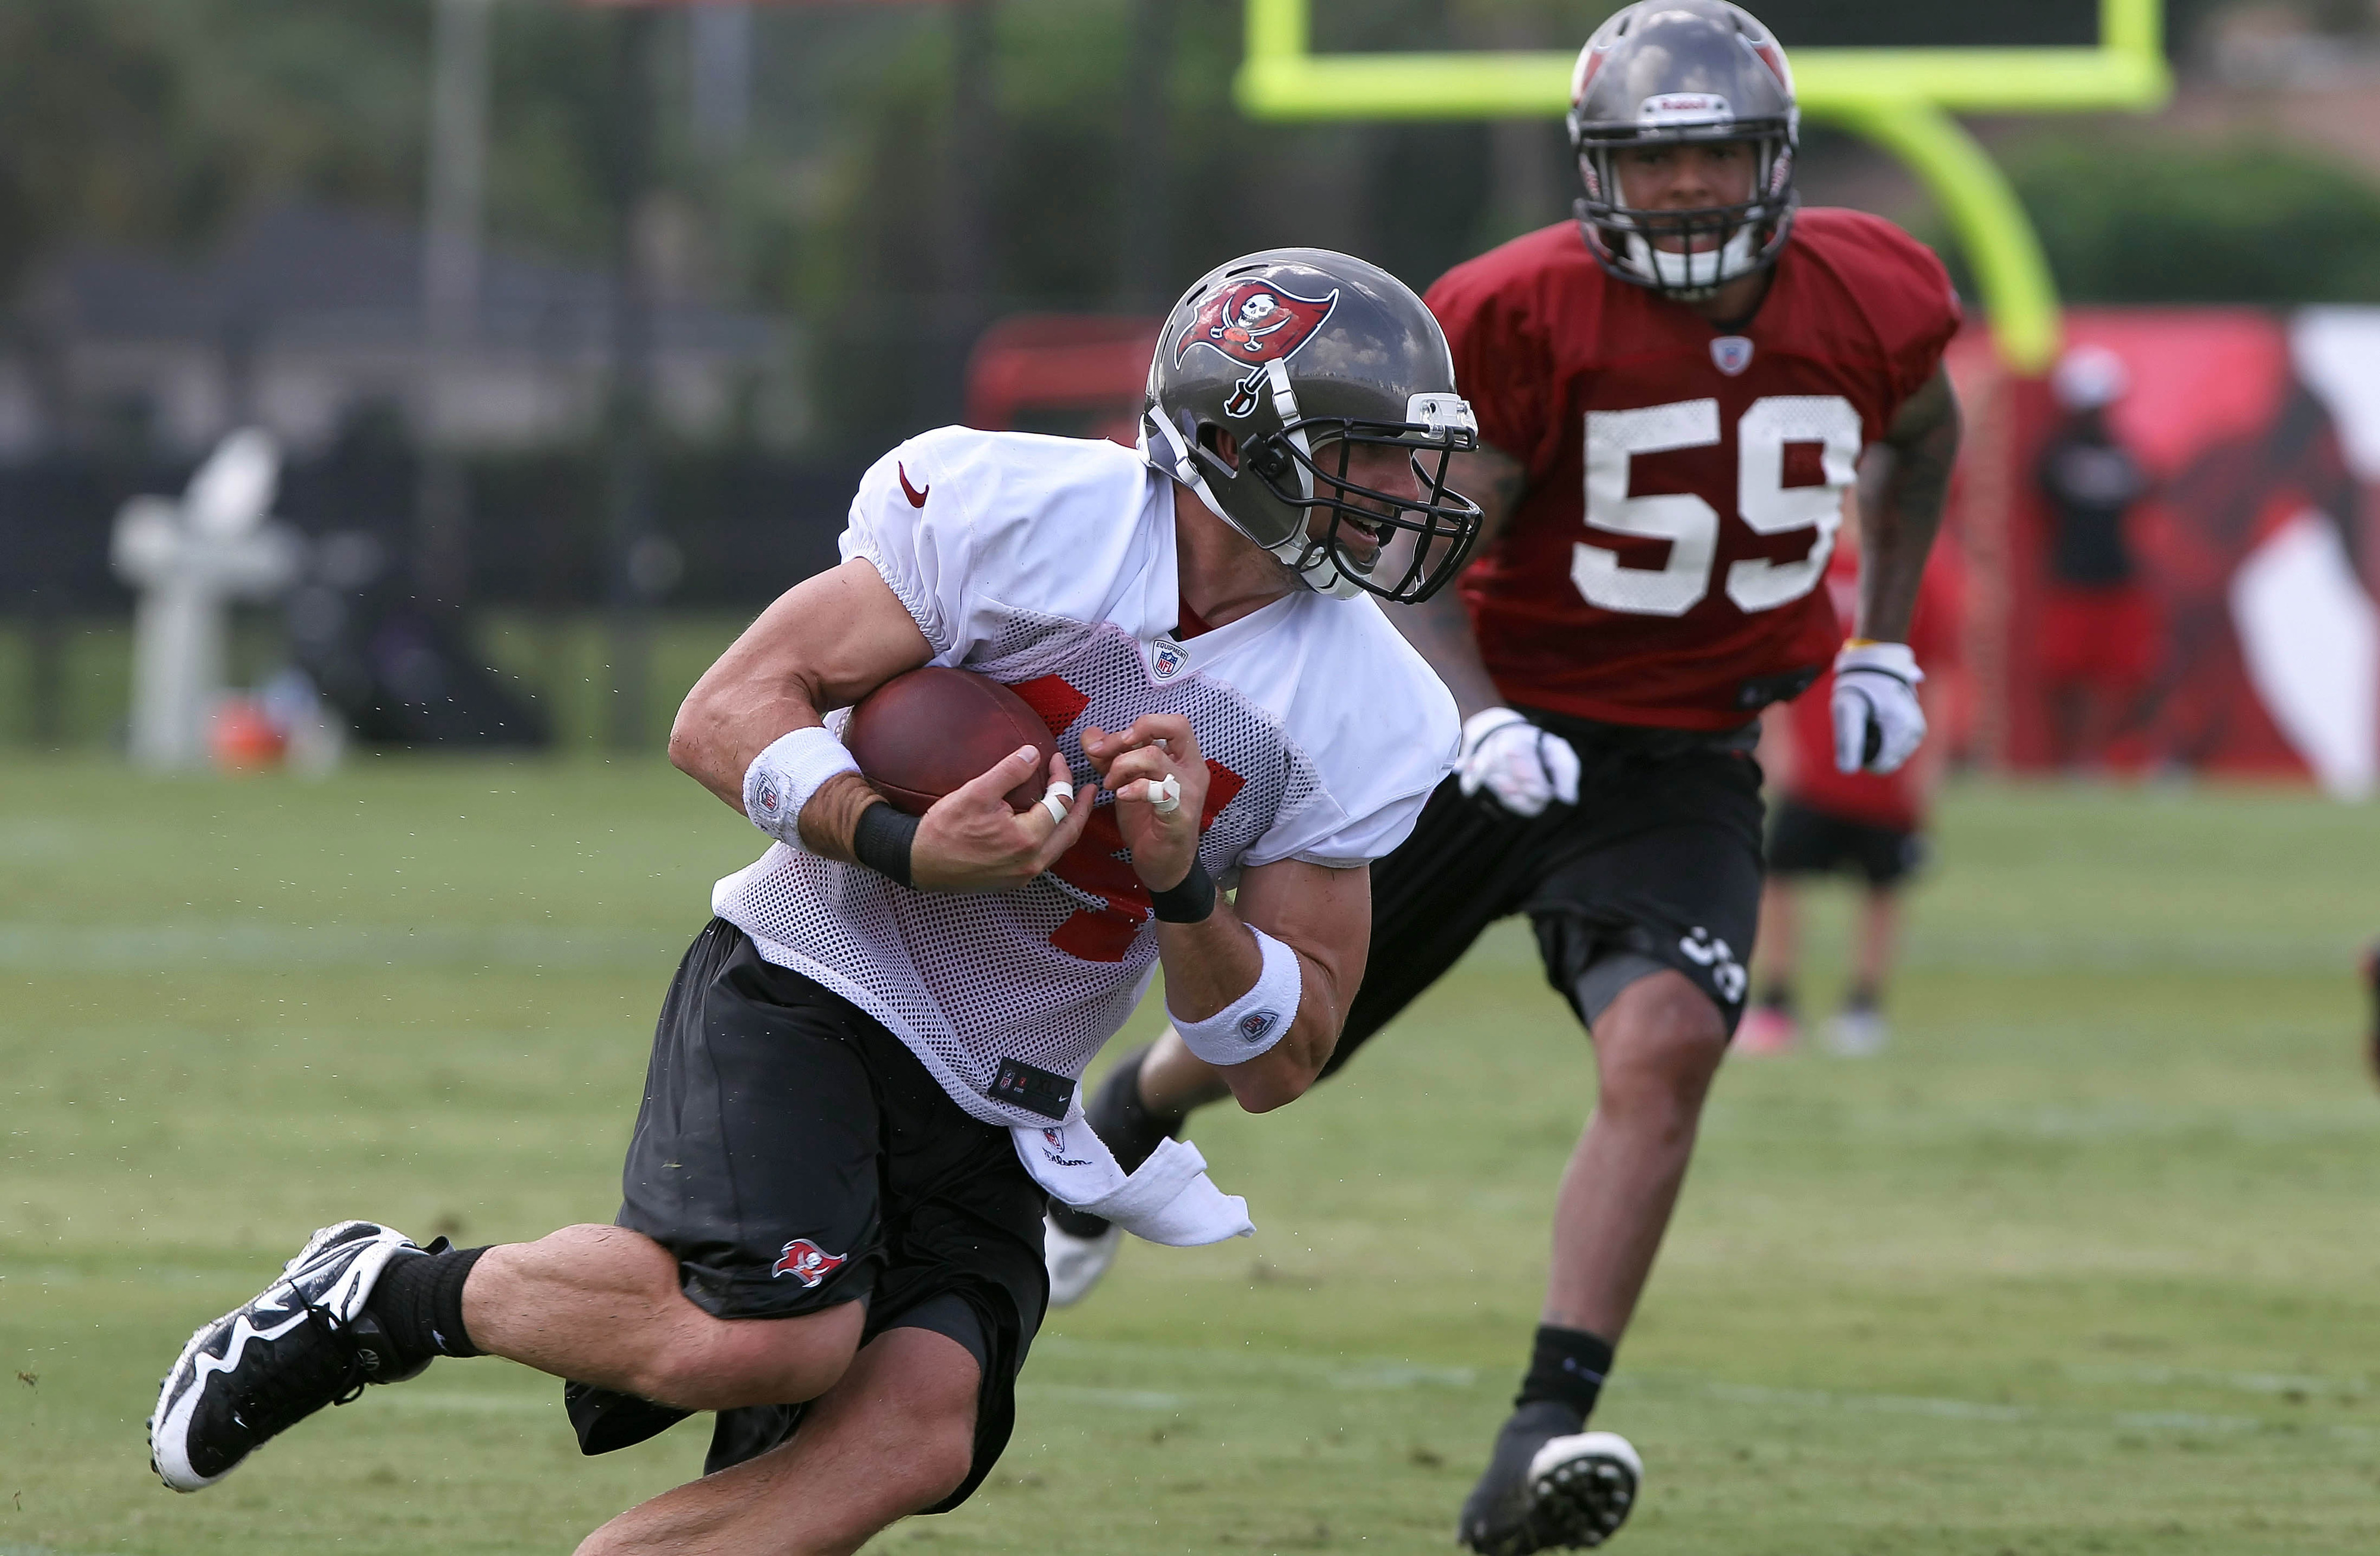 July 28, 2012; Tampa, FL, USA;  Tampa Bay Buccaneers tight end Dallas Clark (44) catches the ball and runs as linebacker Mason Foster (59) defends during training camp at One Buc Place. Mandatory Credit: Kim Klement-US PRESSWIRE